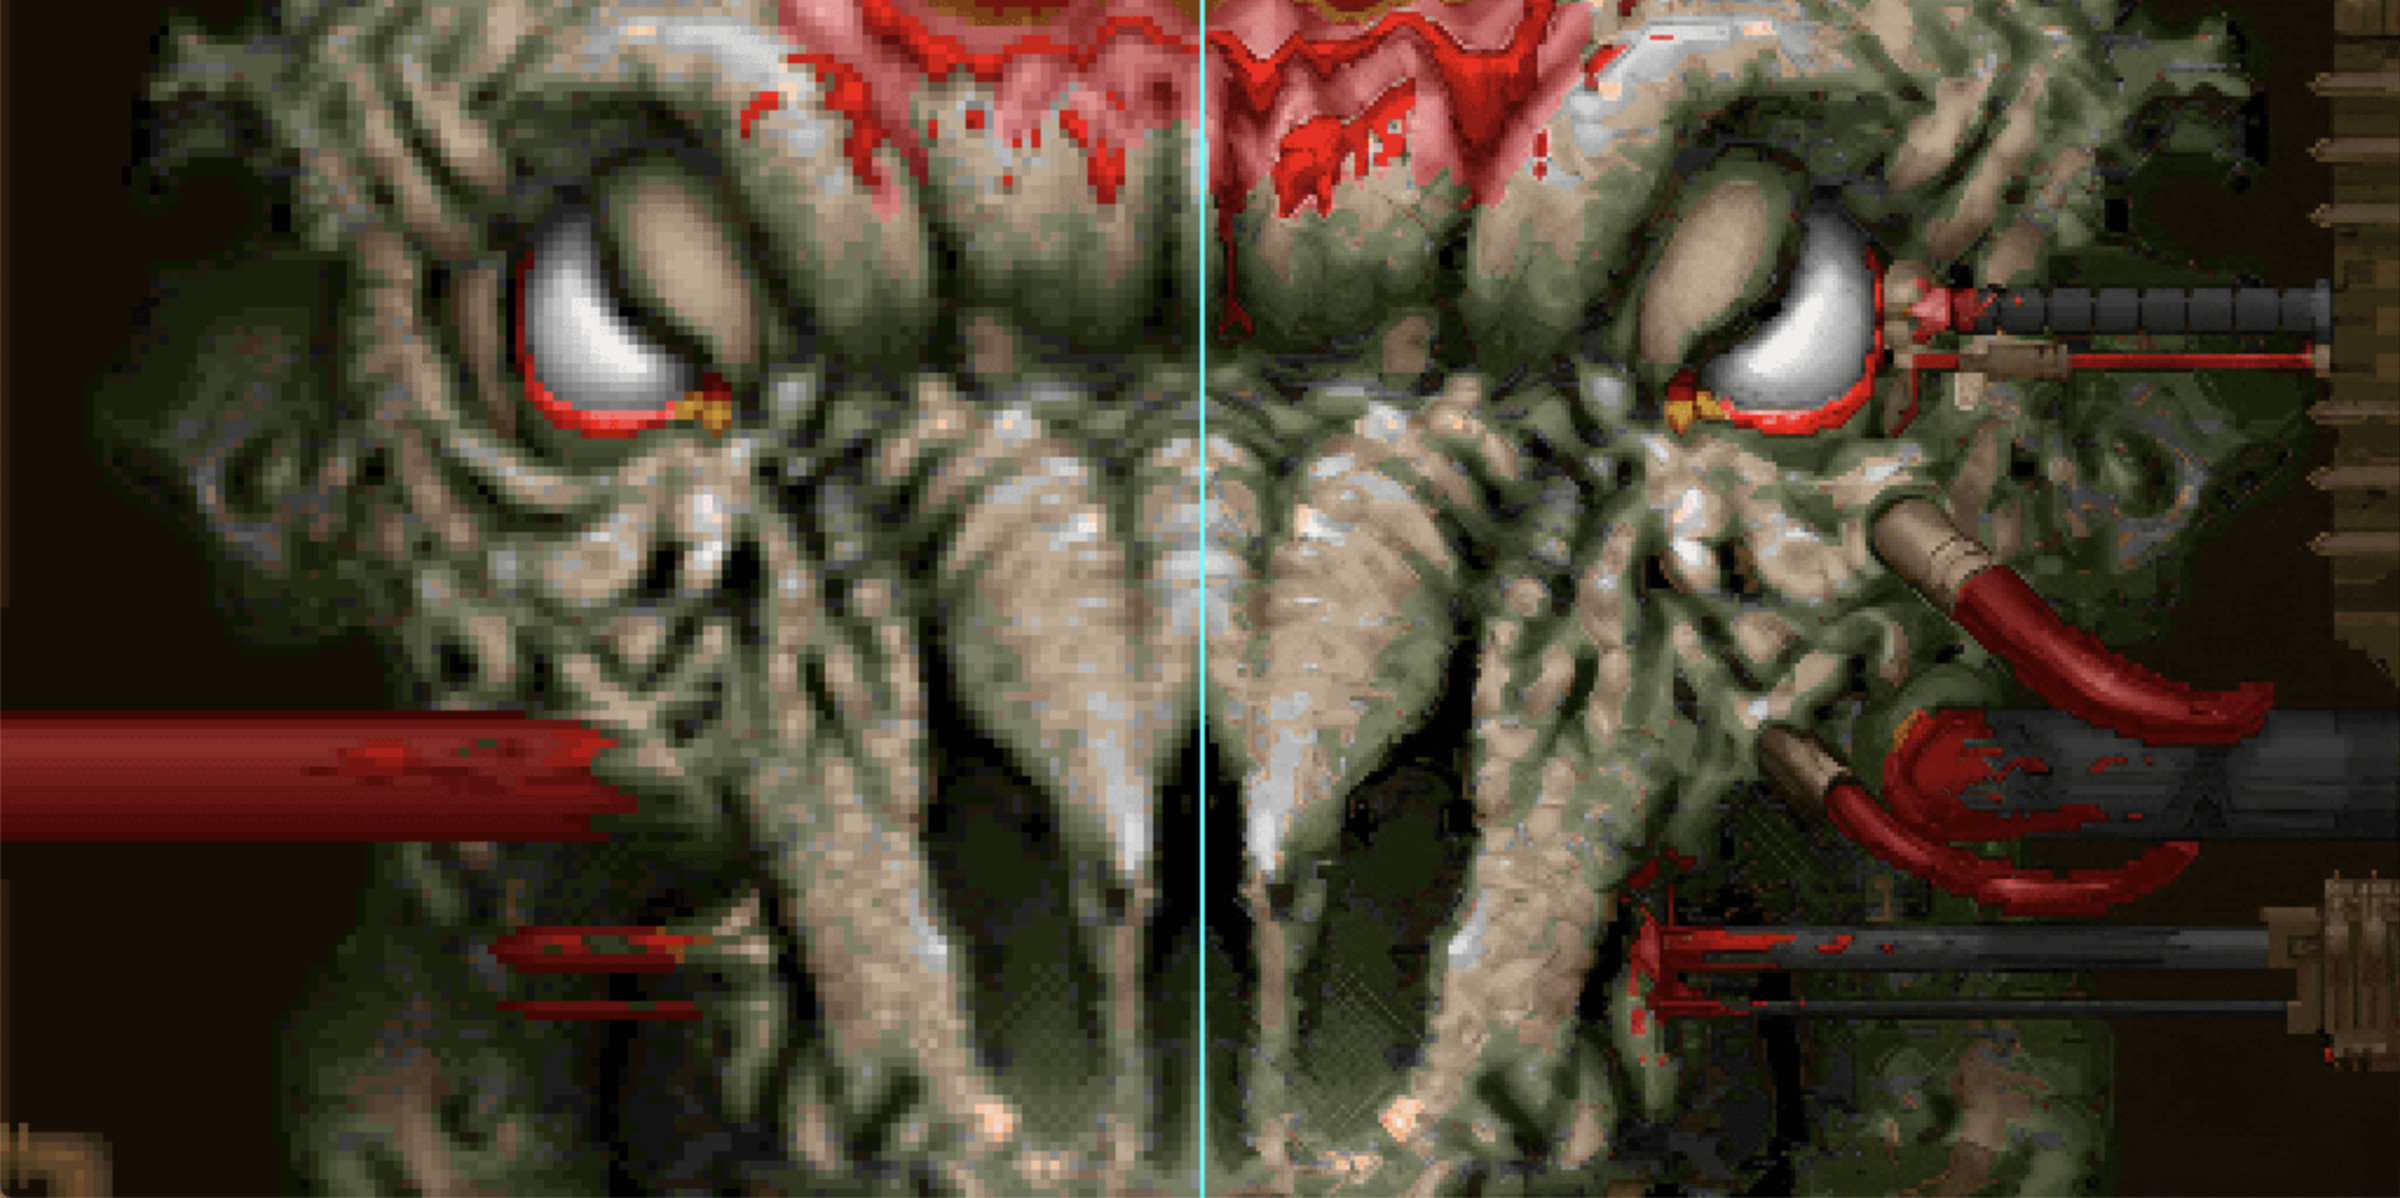 Updated Doom graphics created by hidfan. On the left is the original image; on the right is the AI-enhanced version. 